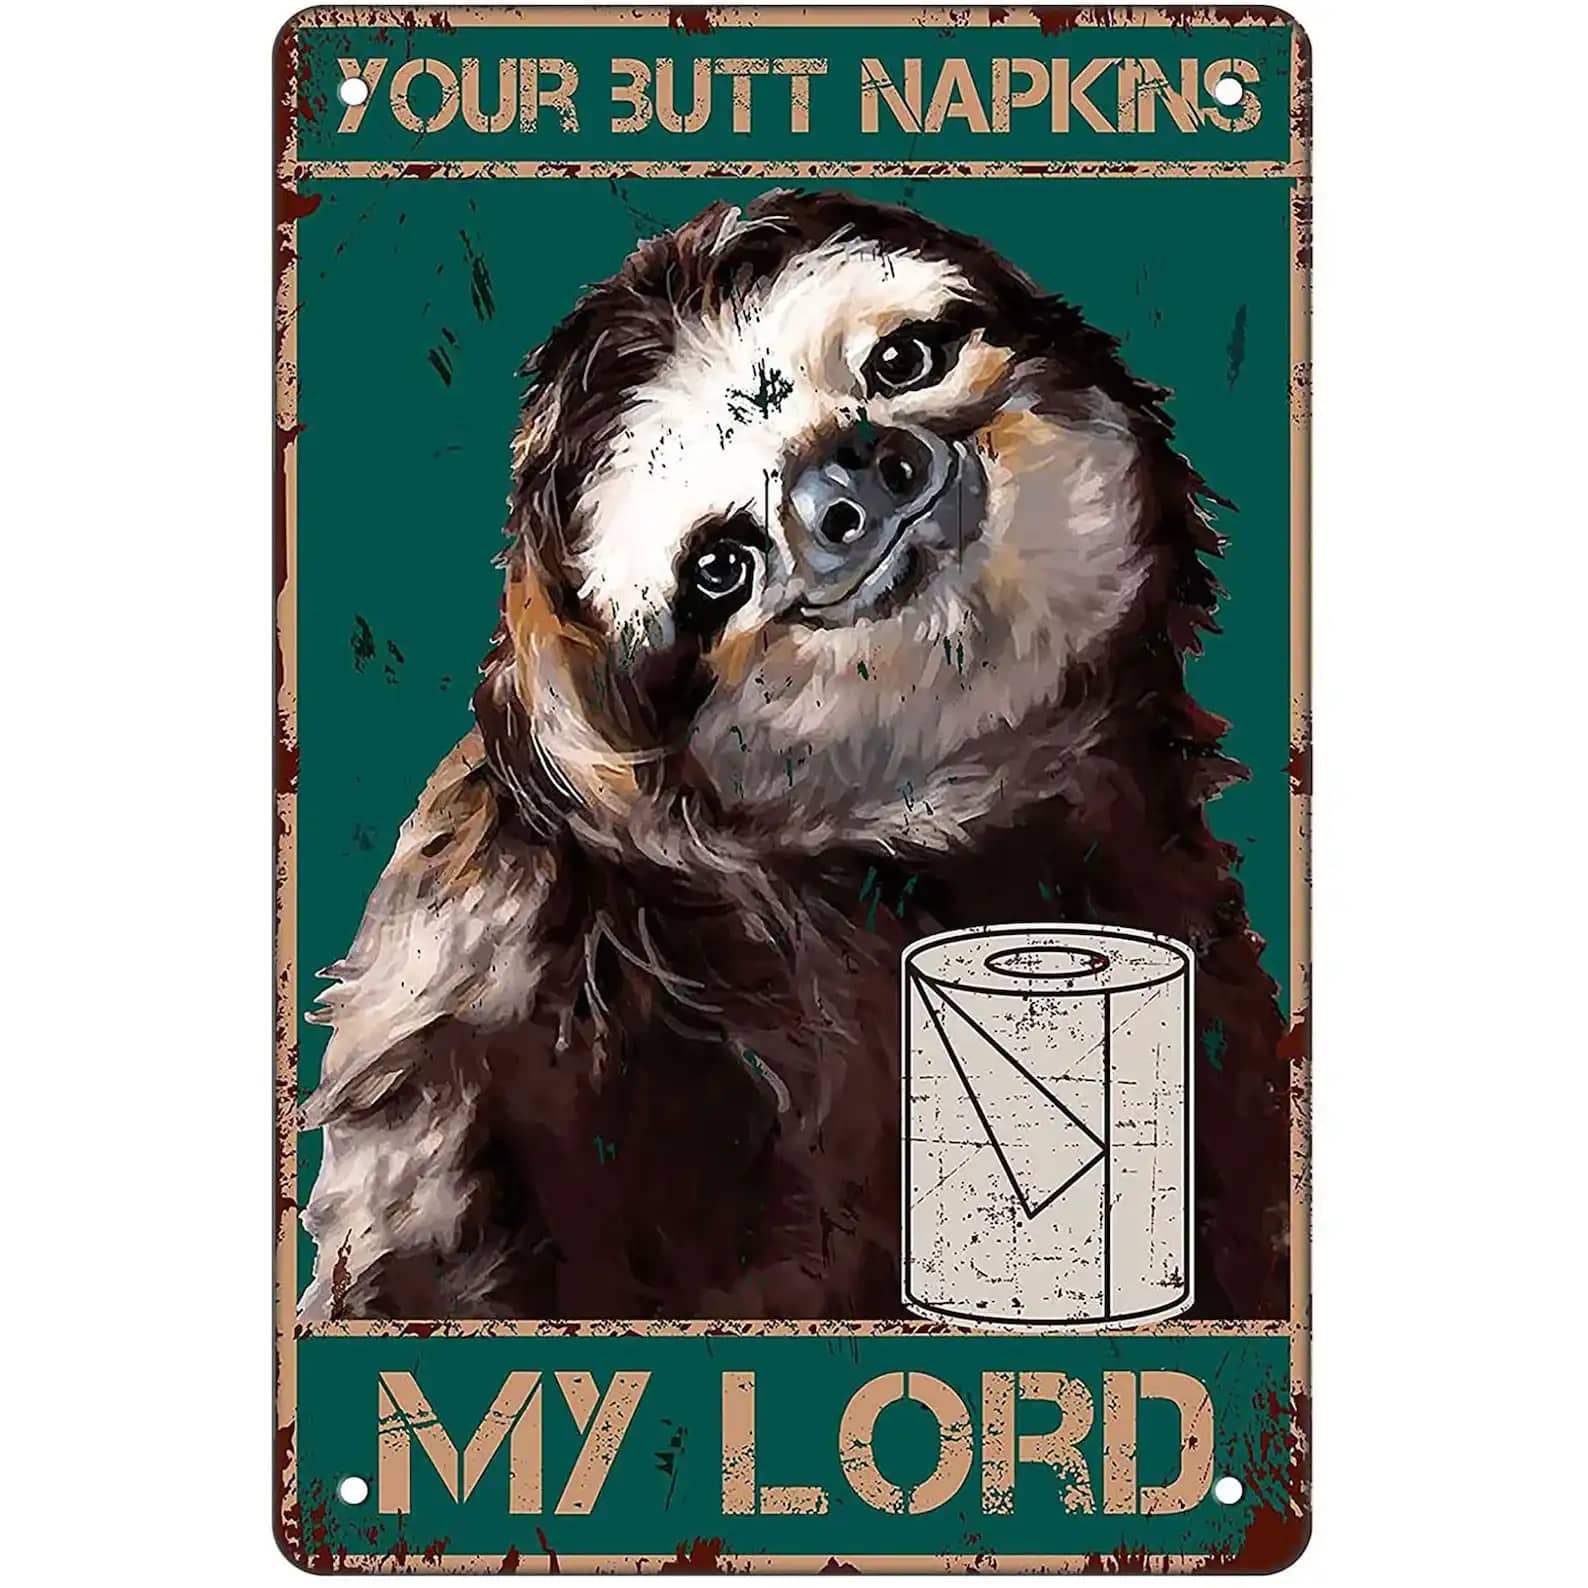 Your Butt Napkins Funny Wall Decor Metal Sign